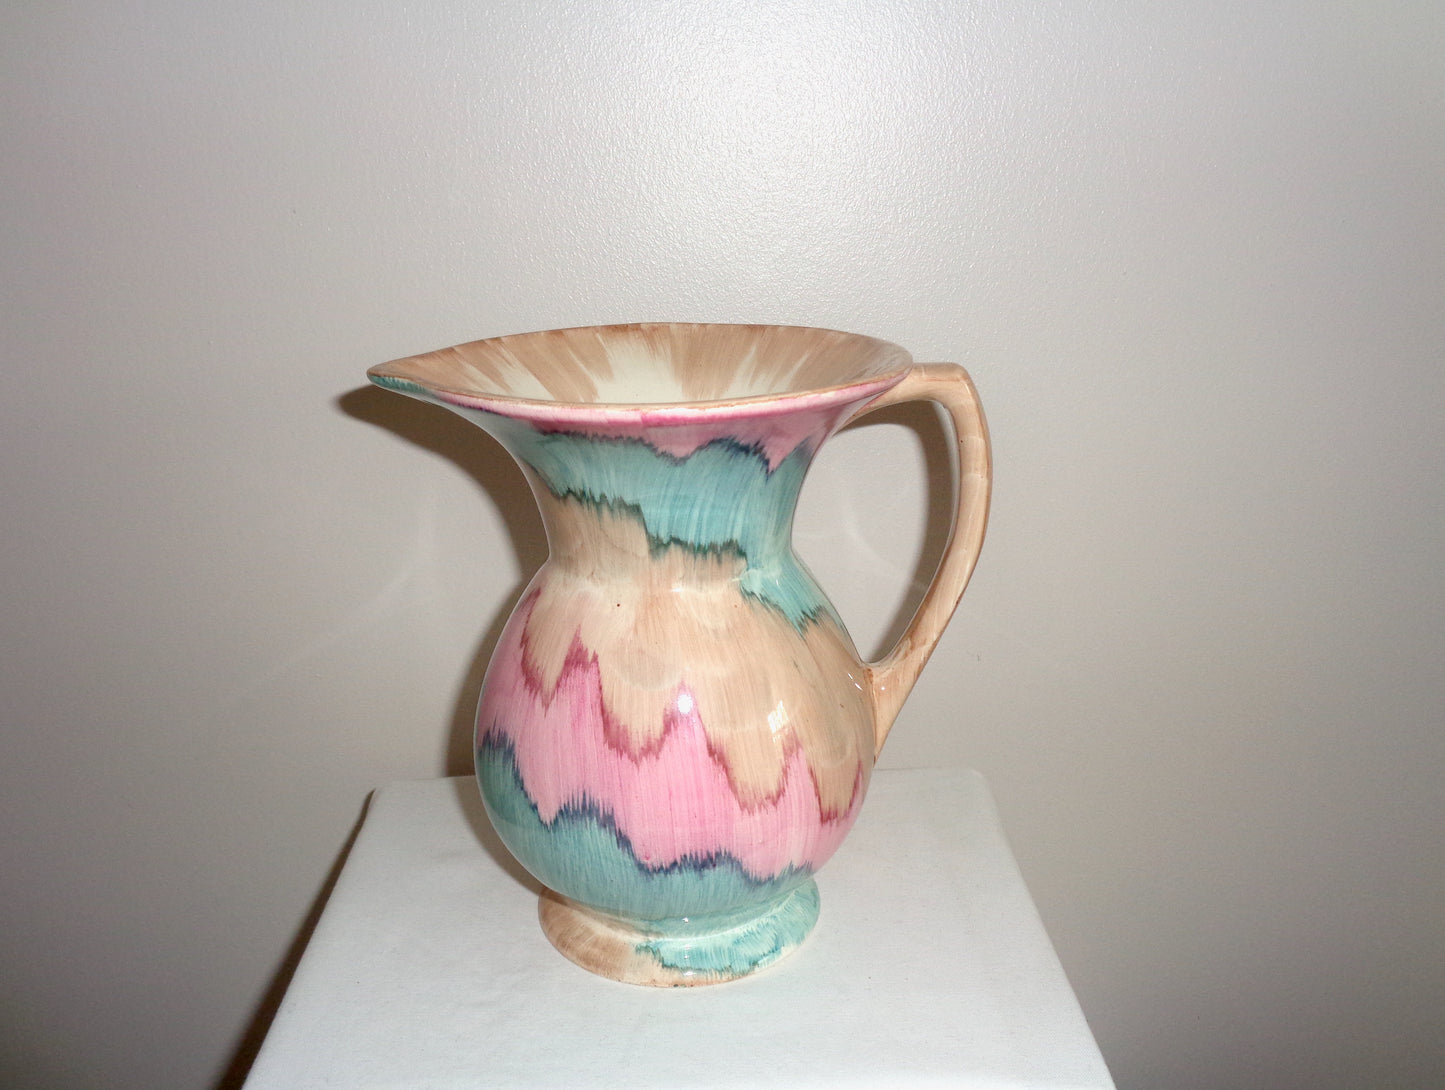 1930s Beswick Pottery Wide Neck Jug/Pitcher Pattern 8094 260/3 In Pastel Shades